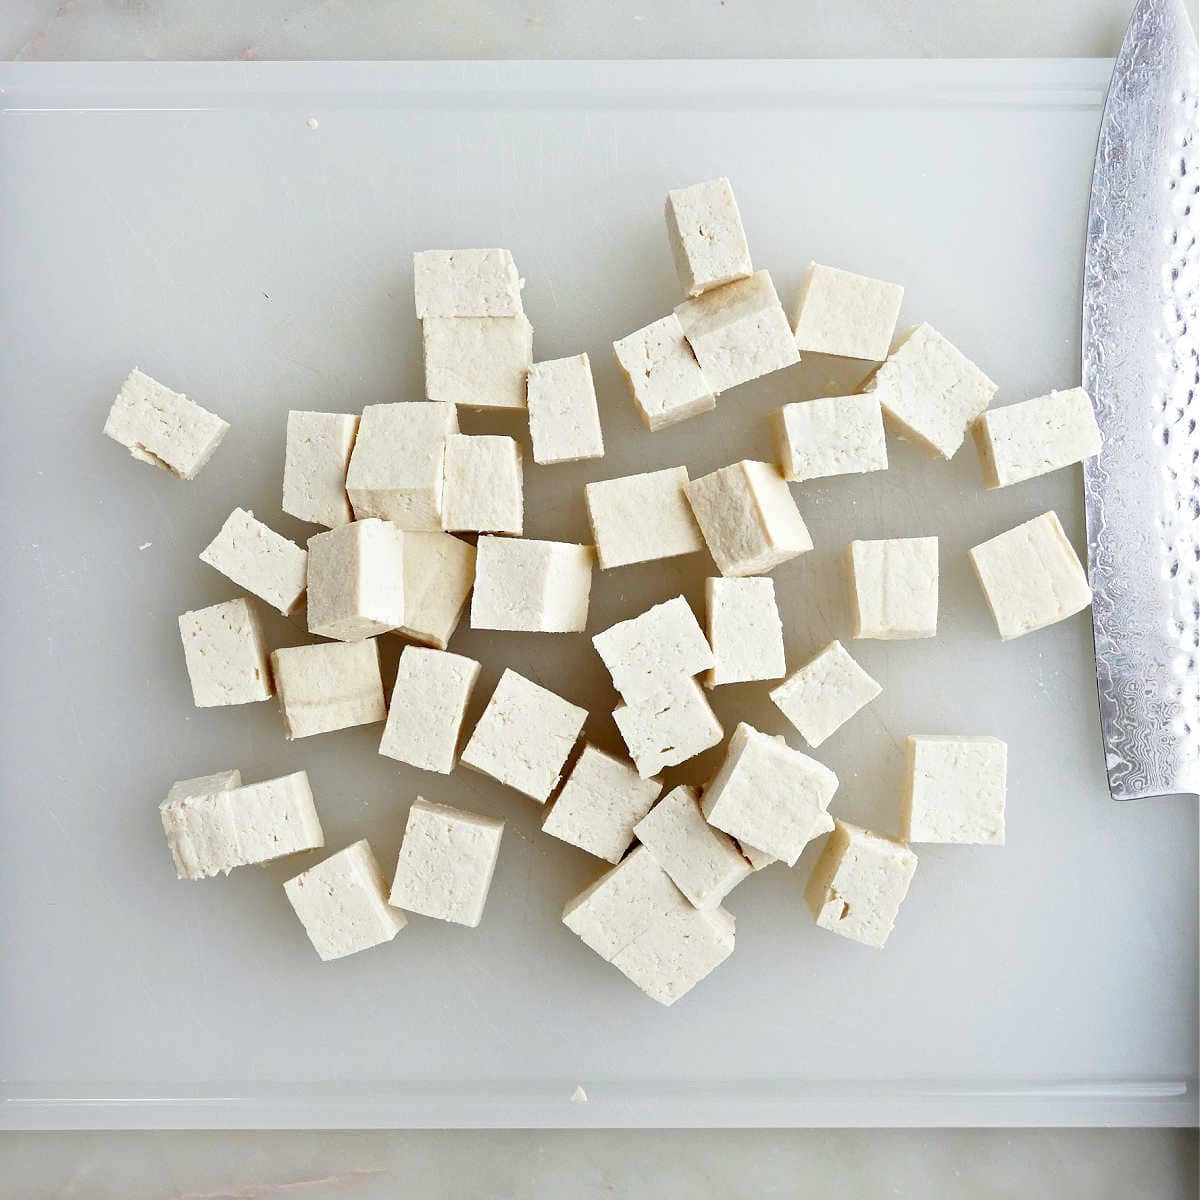 Sliced tofu cut into squares on a baking sheet.